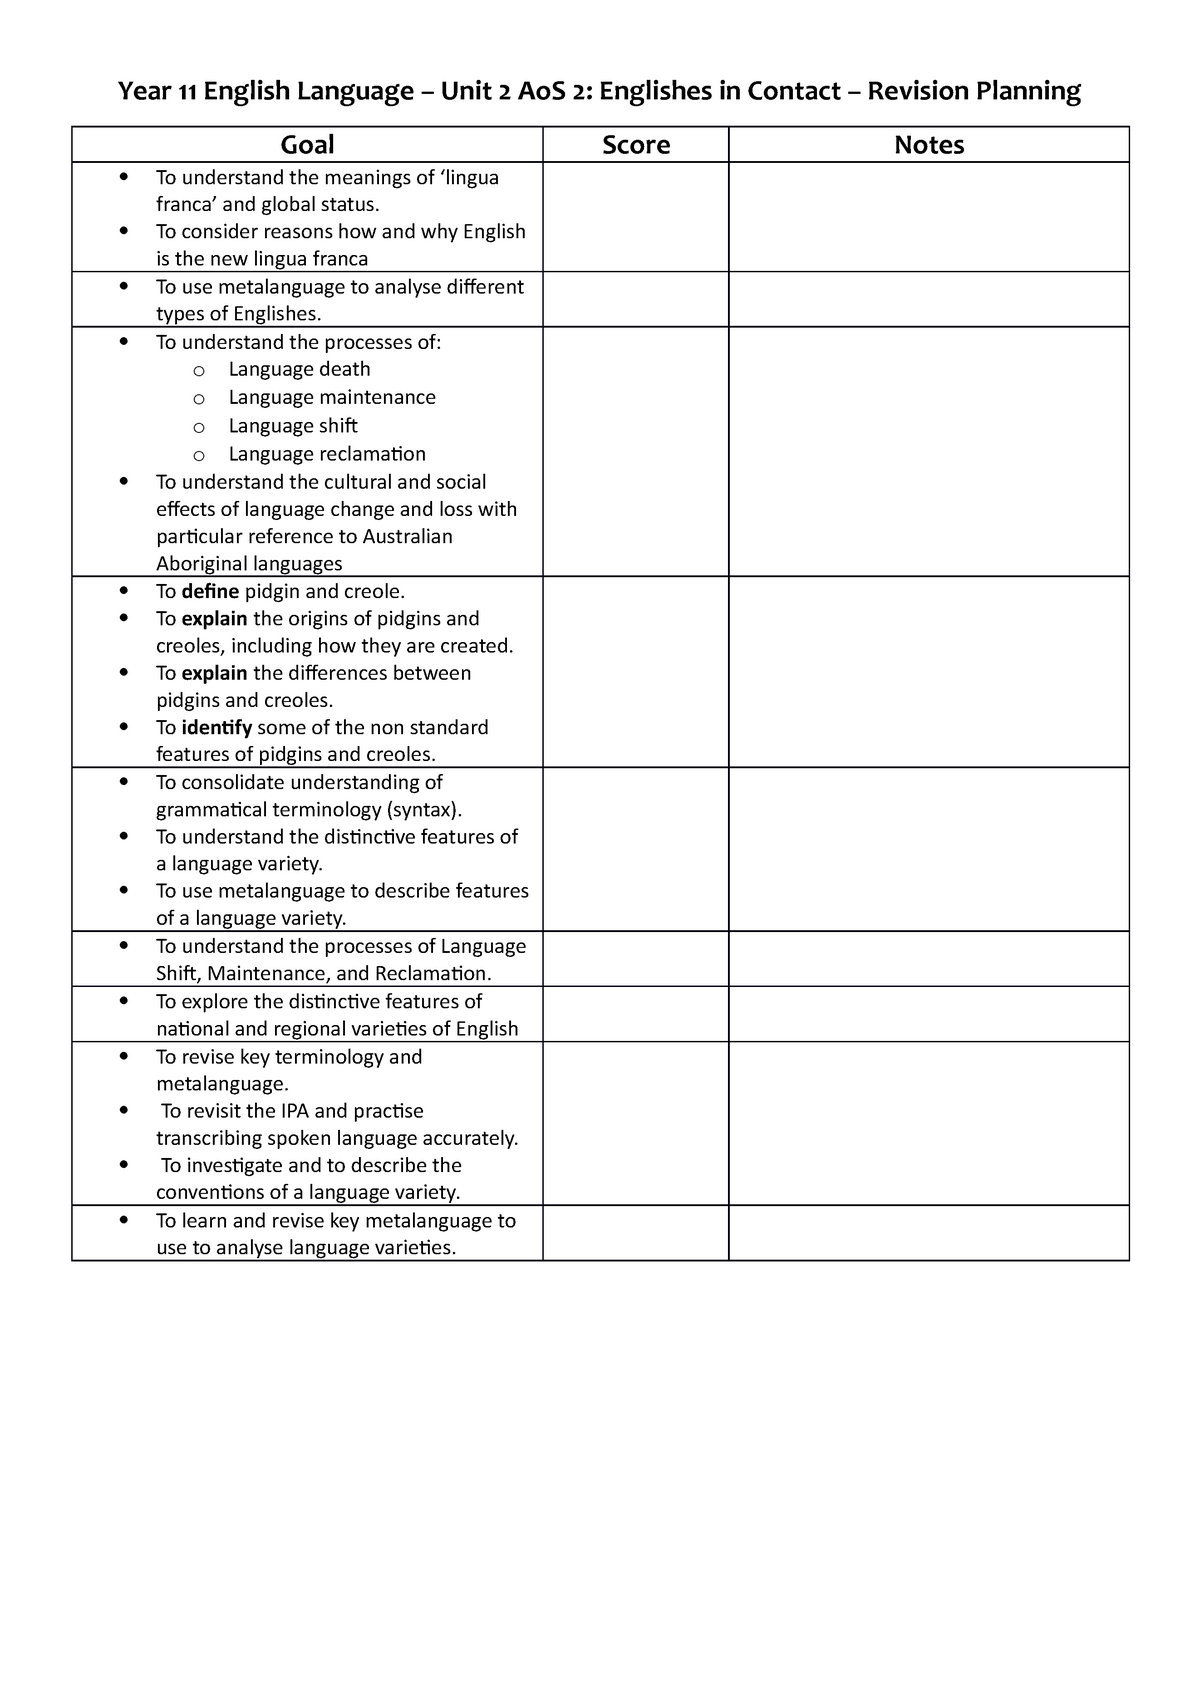 unit-2-ao-s-2-revision-planner-year-11-english-language-unit-2-aos